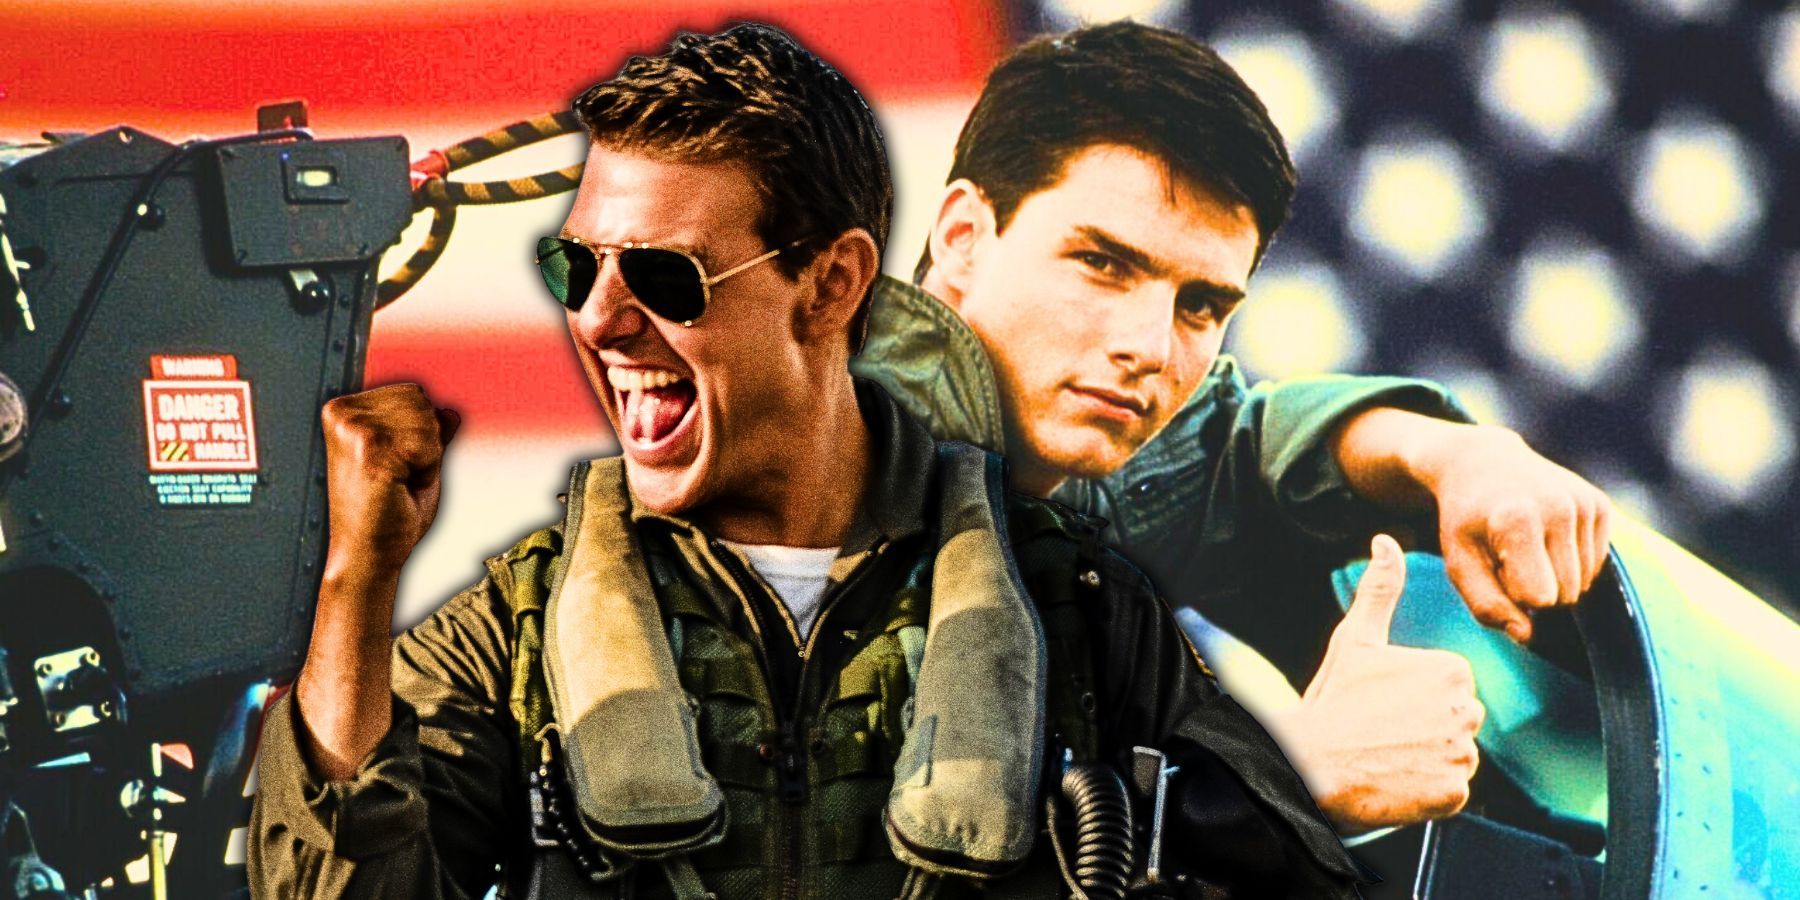 “My Brother’s Was Original”: Ridley Scott’s True Feelings About Top Gun: Maverick Reportedly Revealed